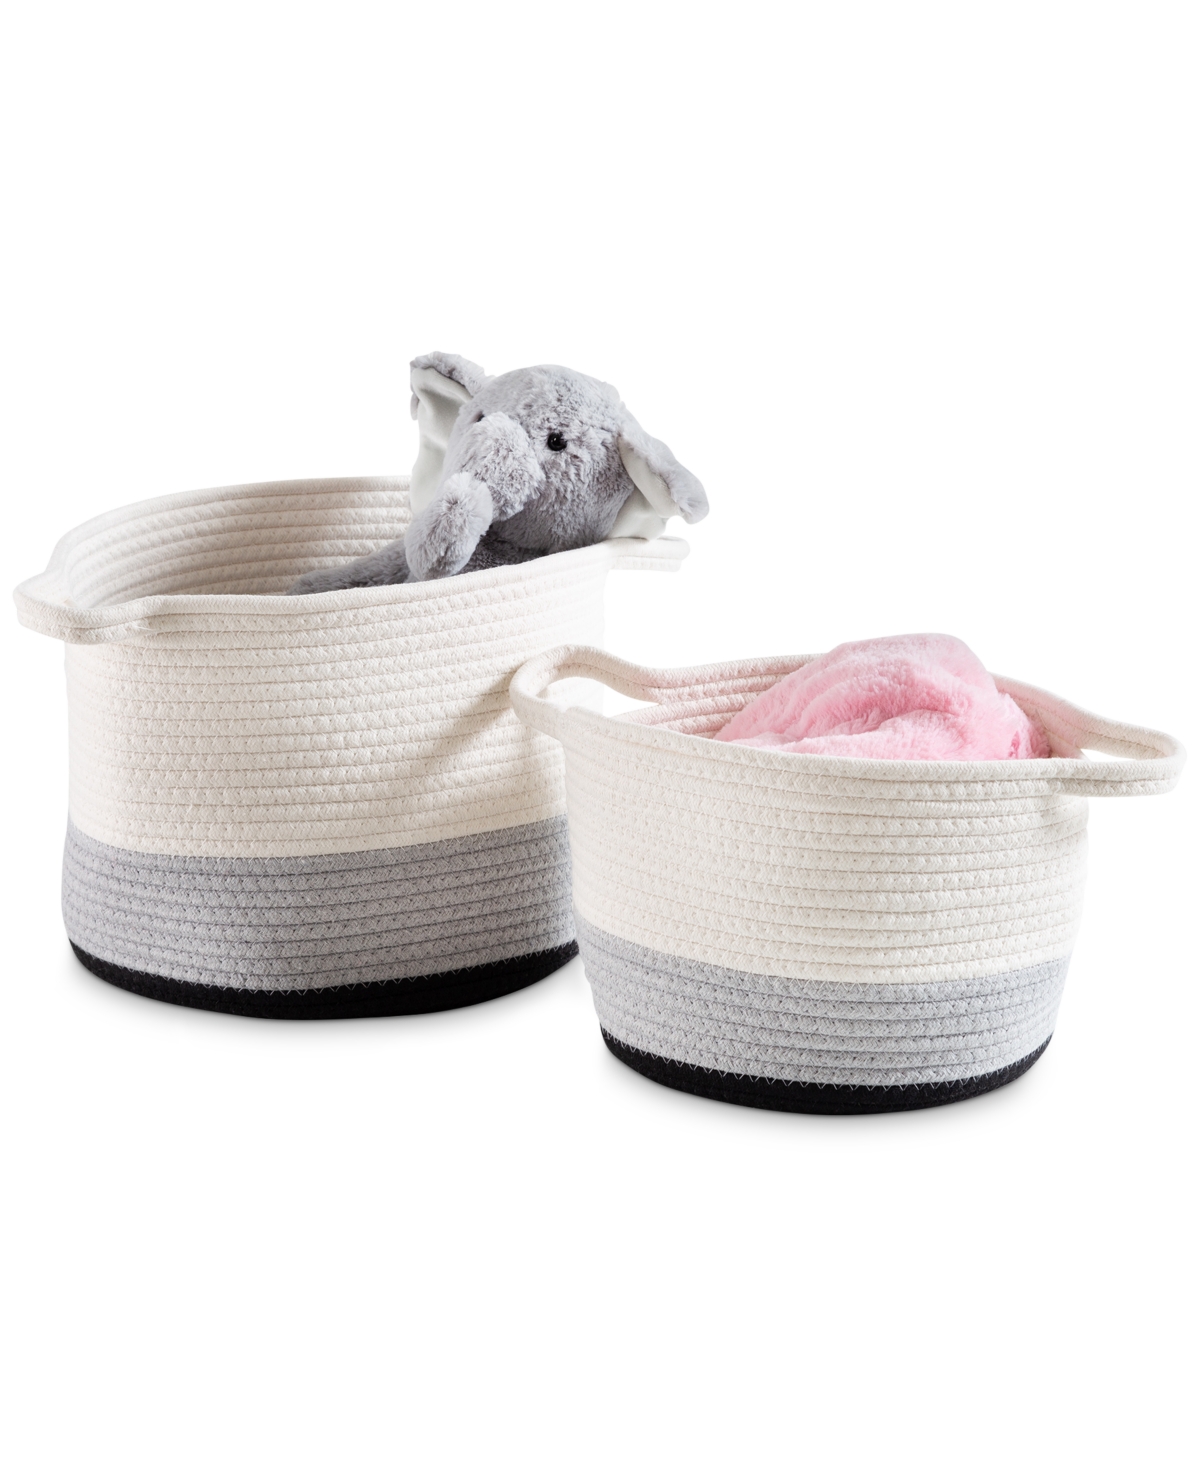 Honey Can Do Nesting Cotton Rope Storage Baskets, Set Of 2 In Black